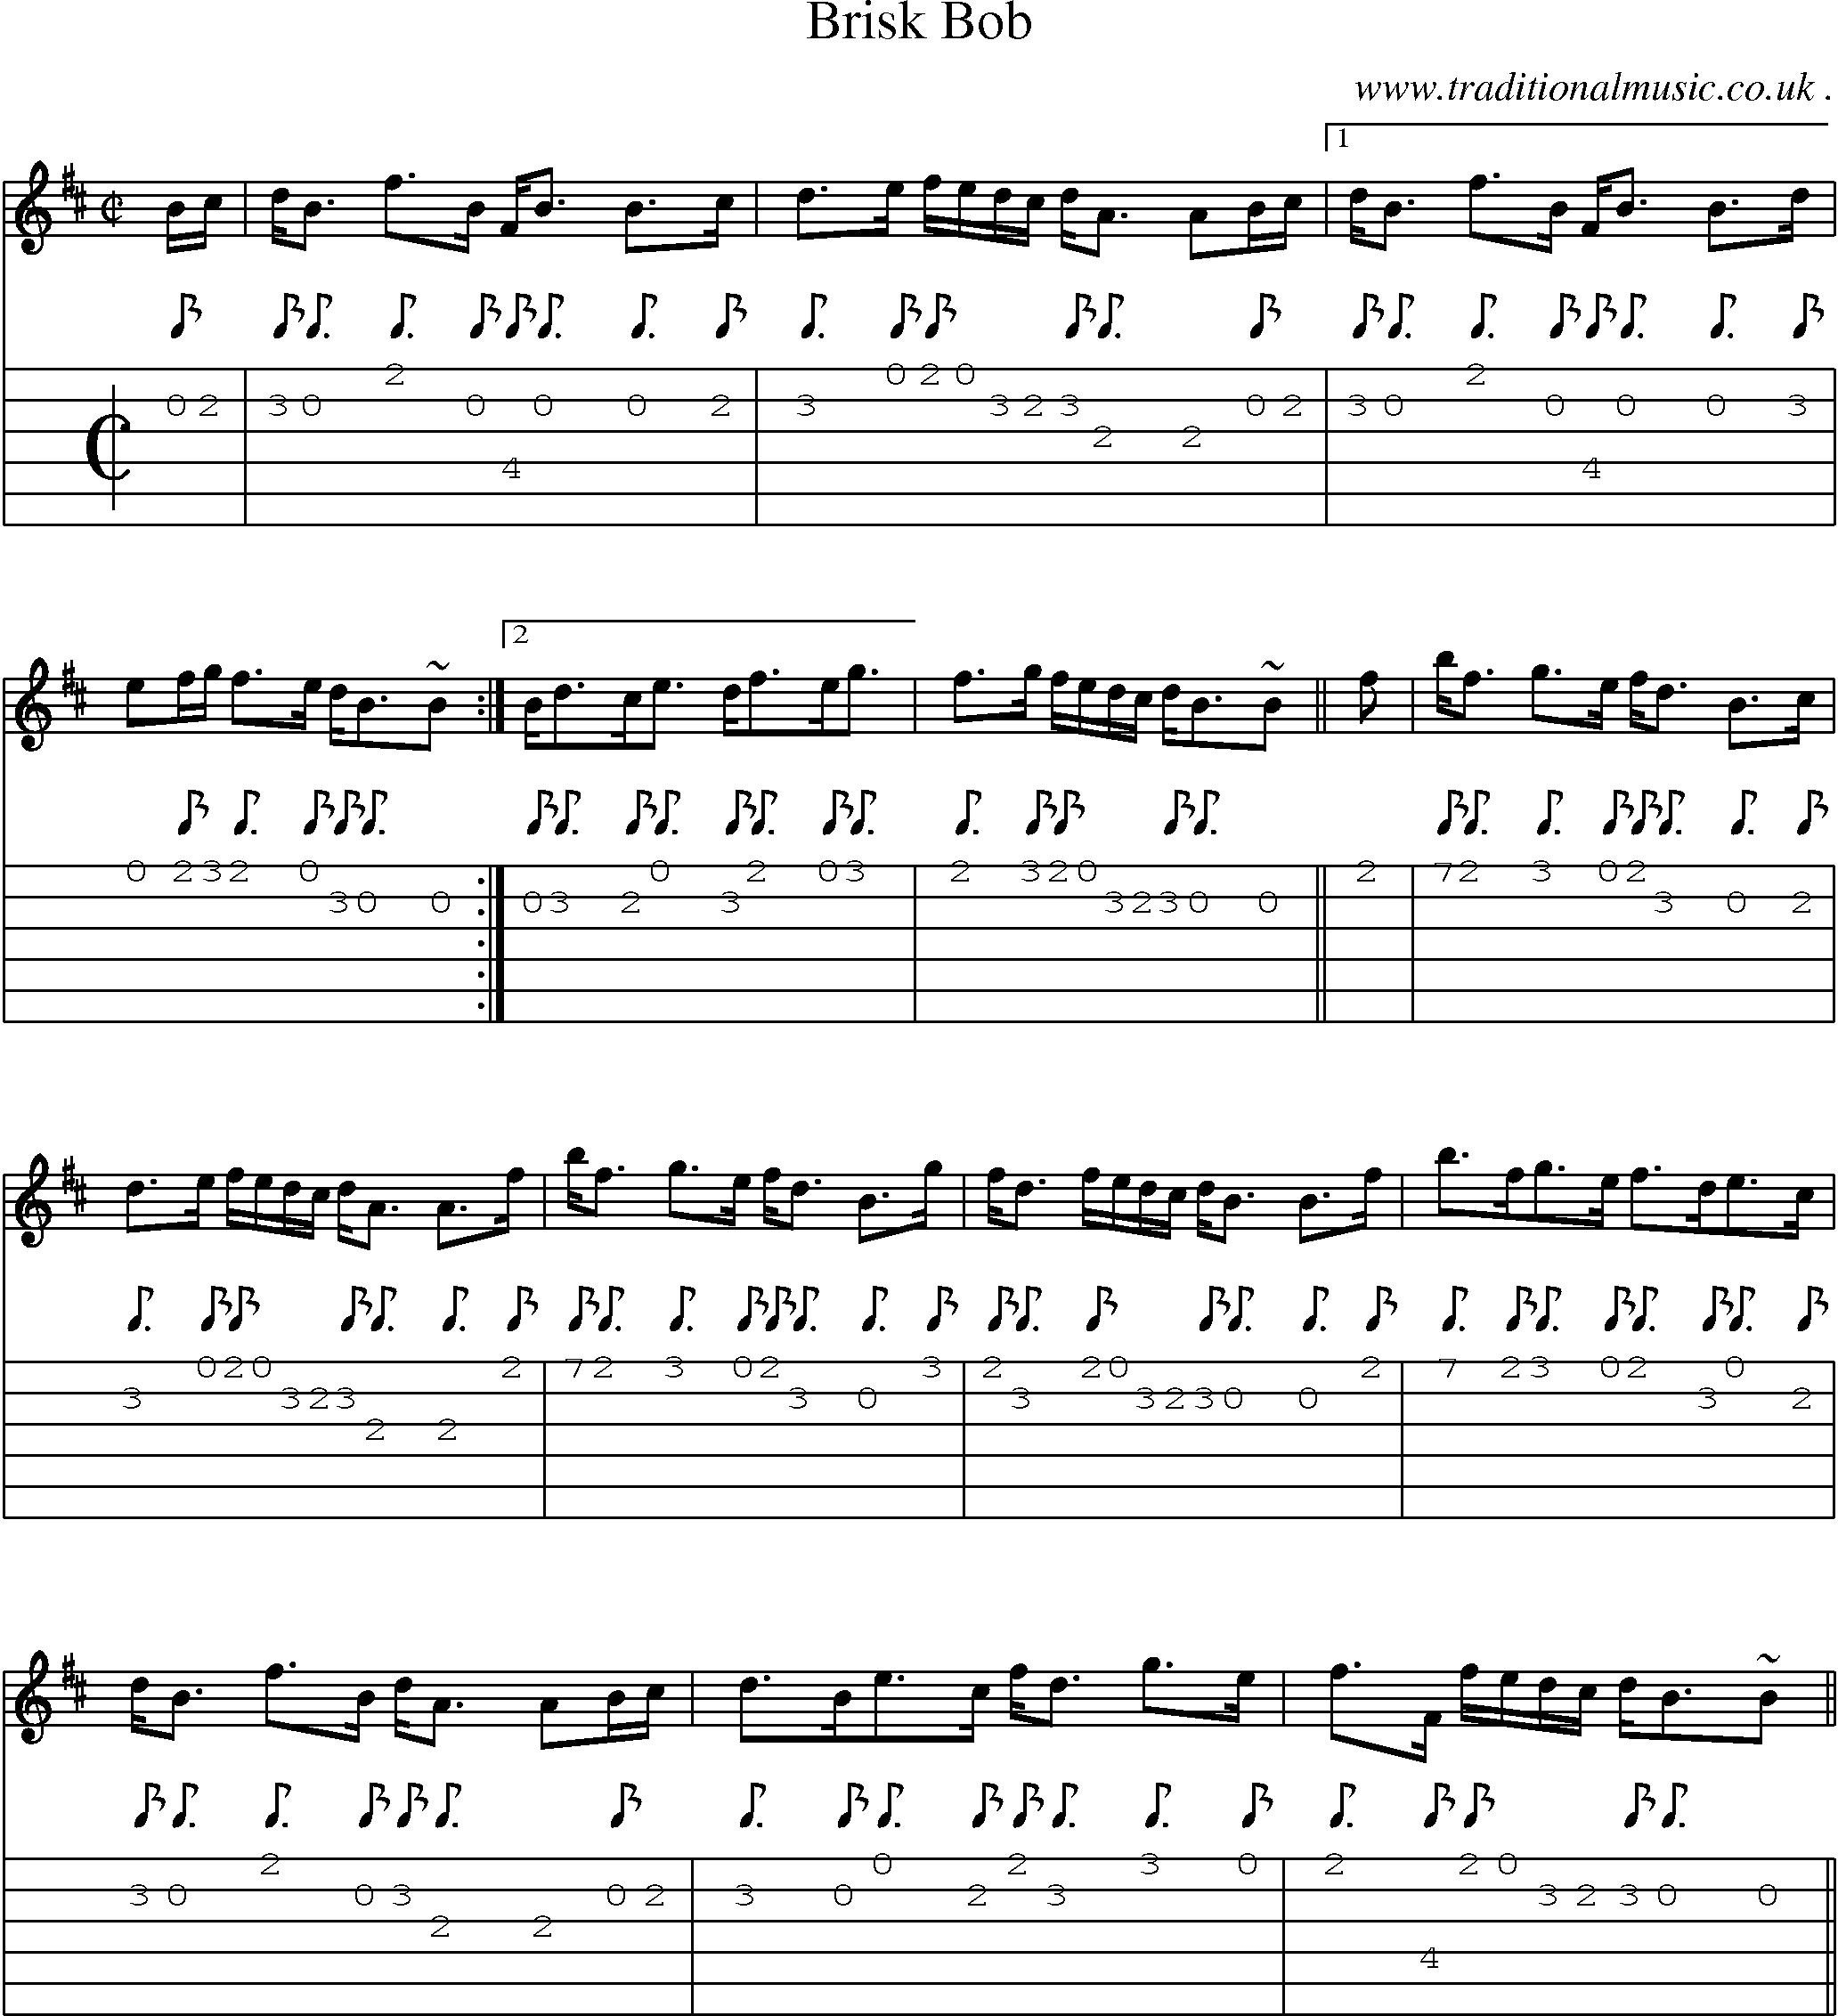 Sheet-music  score, Chords and Guitar Tabs for Brisk Bob